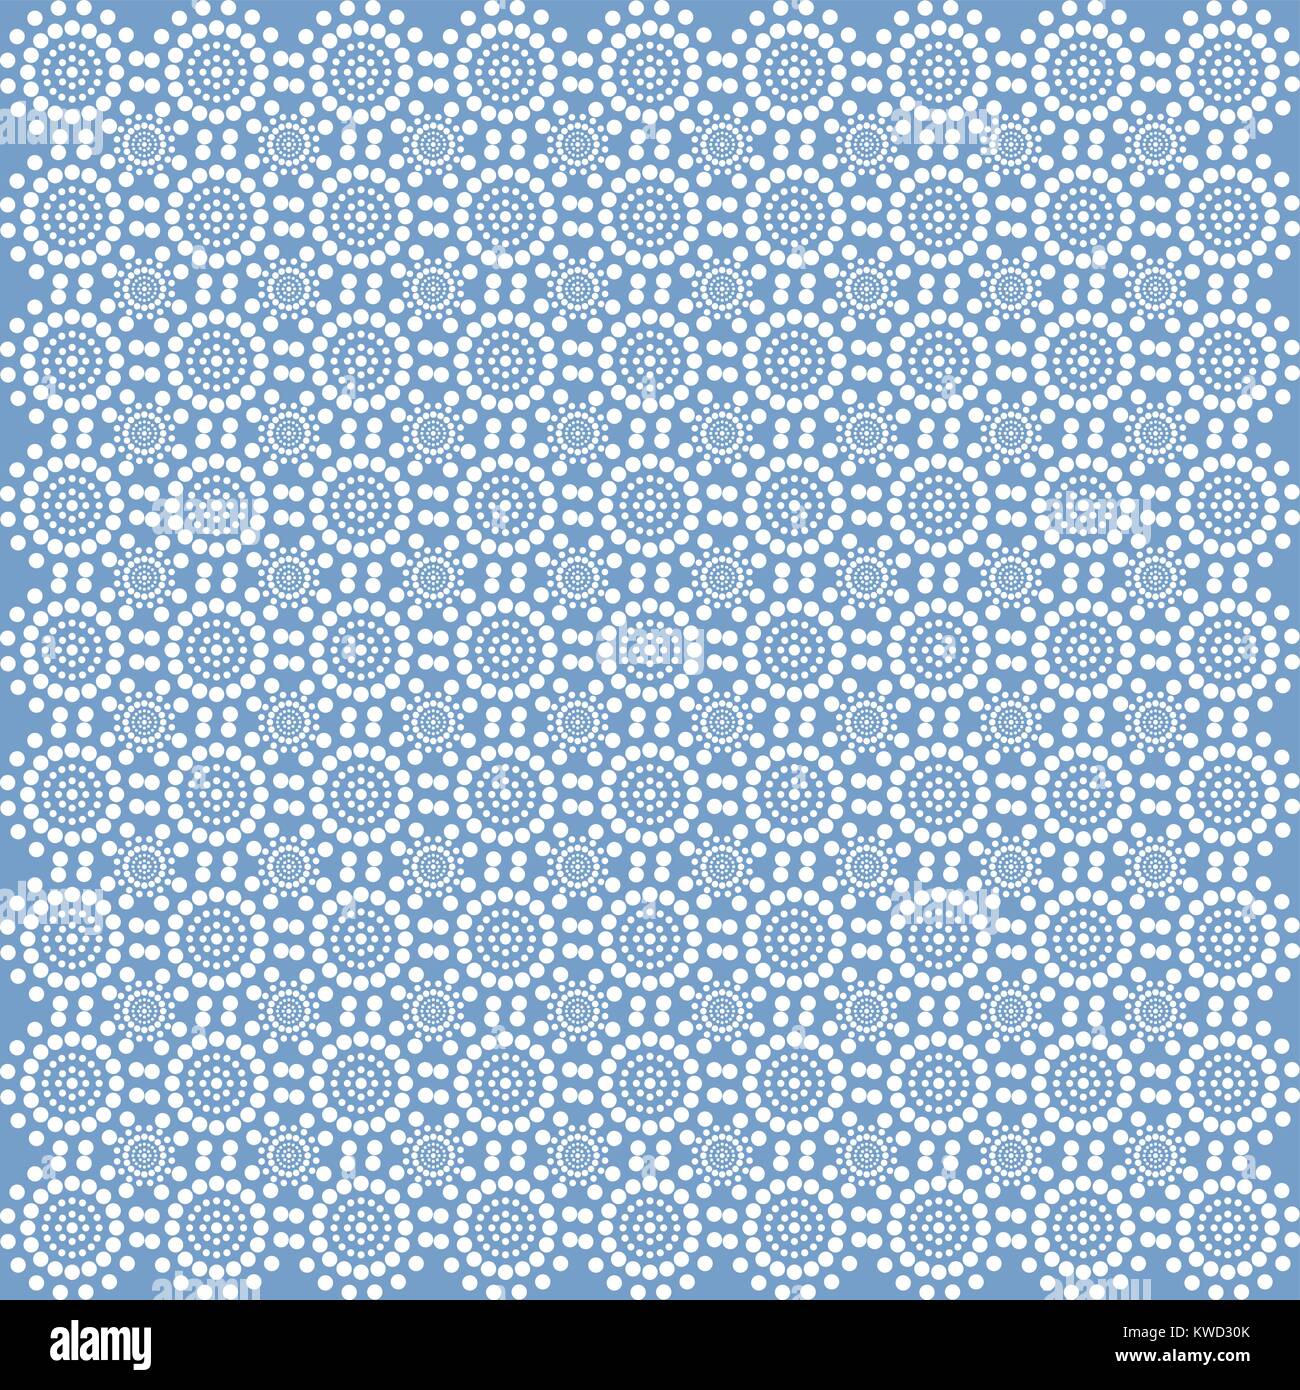 White lace from circles on a blue background Stock Vector